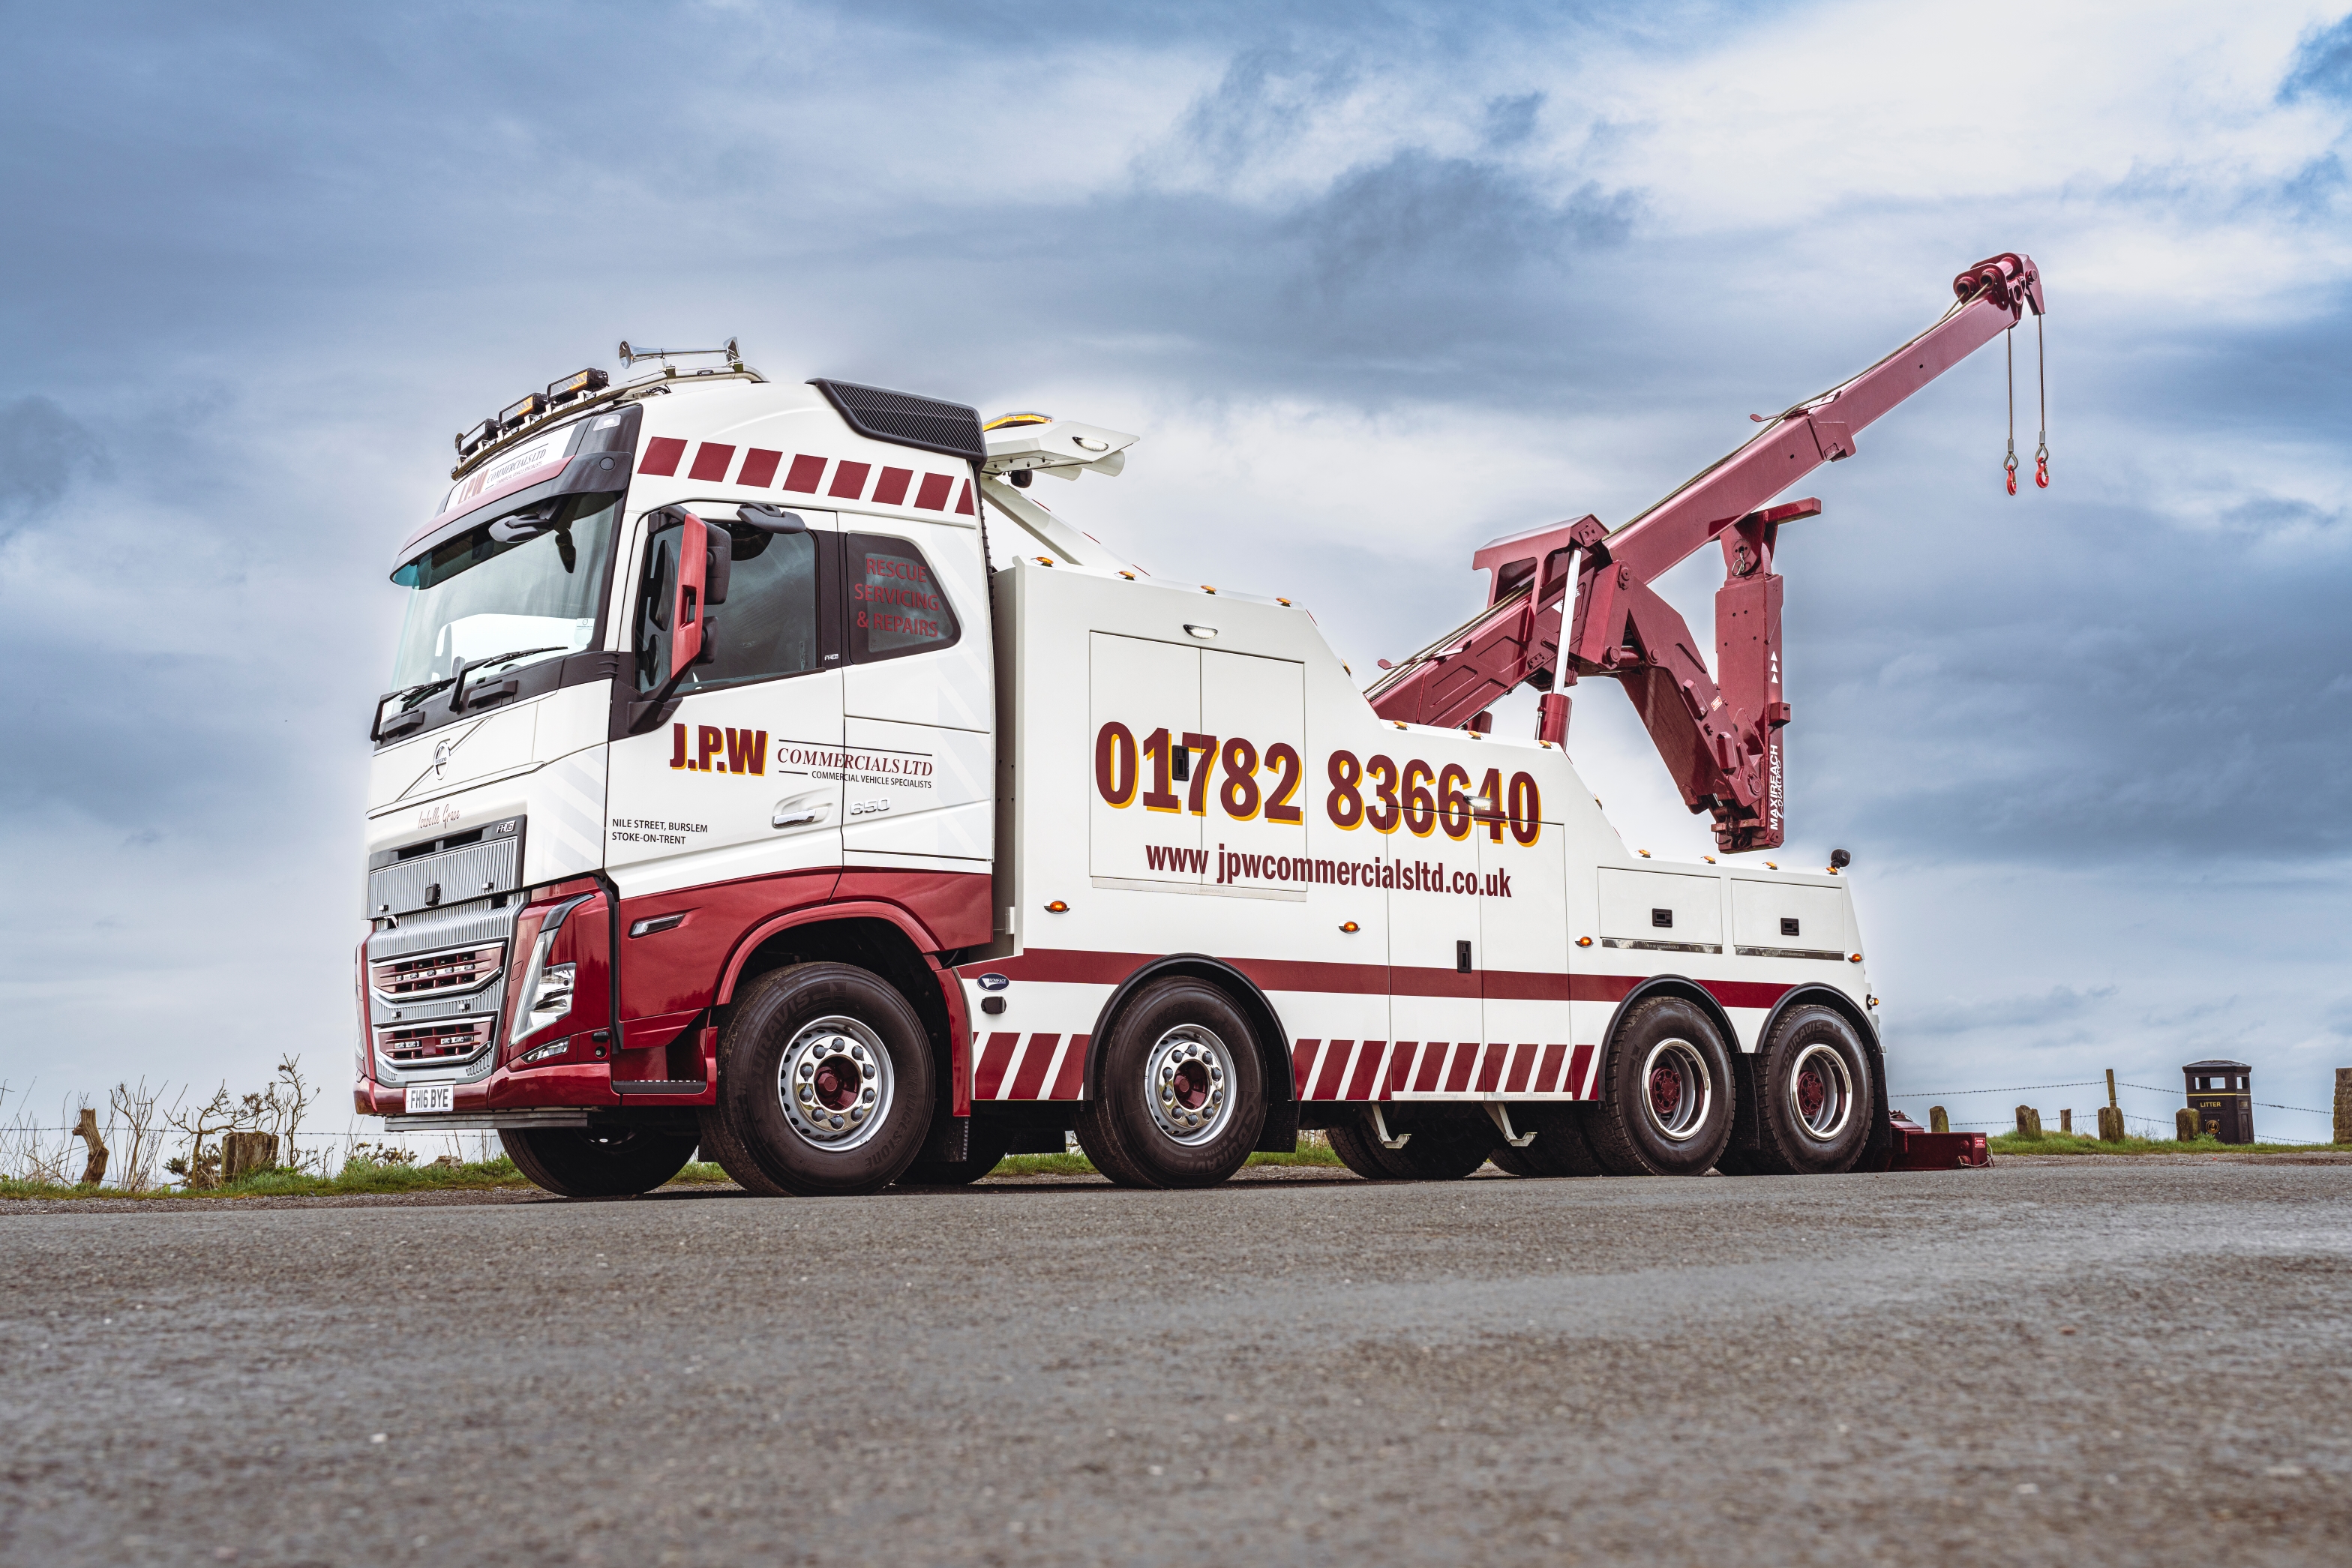 New Boniface Recoverer Trident for JPW Commercials